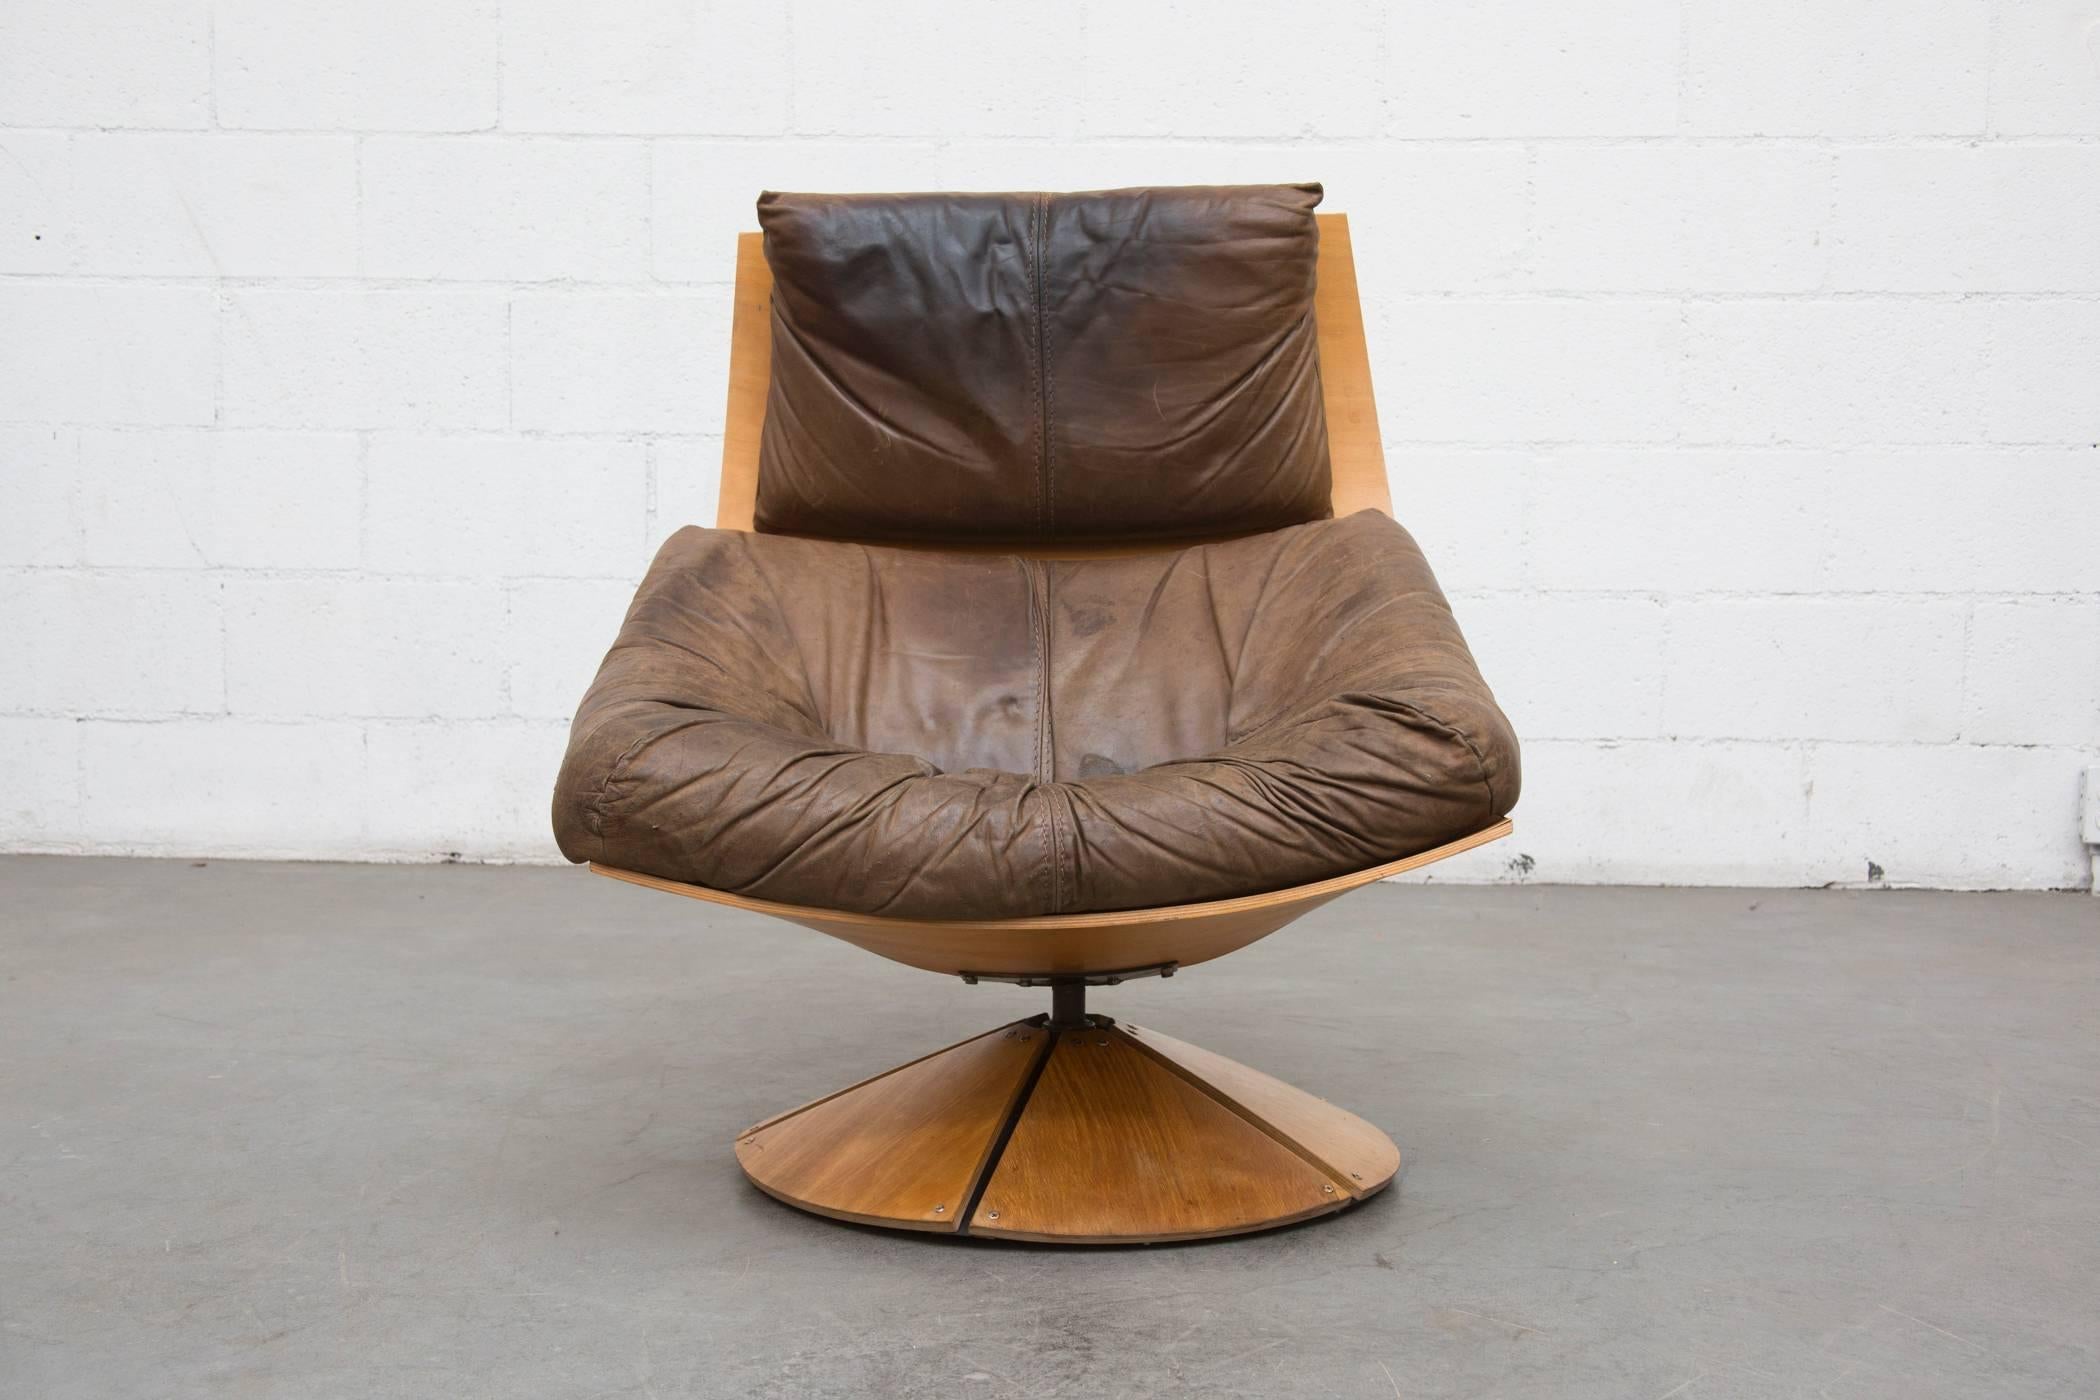 Rare Gerard Van Den Berg swivel lounger for Montis with birch plywood frame and well loved brown leather seating with beautiful patina. In original condition with visible signs of wear to leather and some signs of wear to frame both consistent with